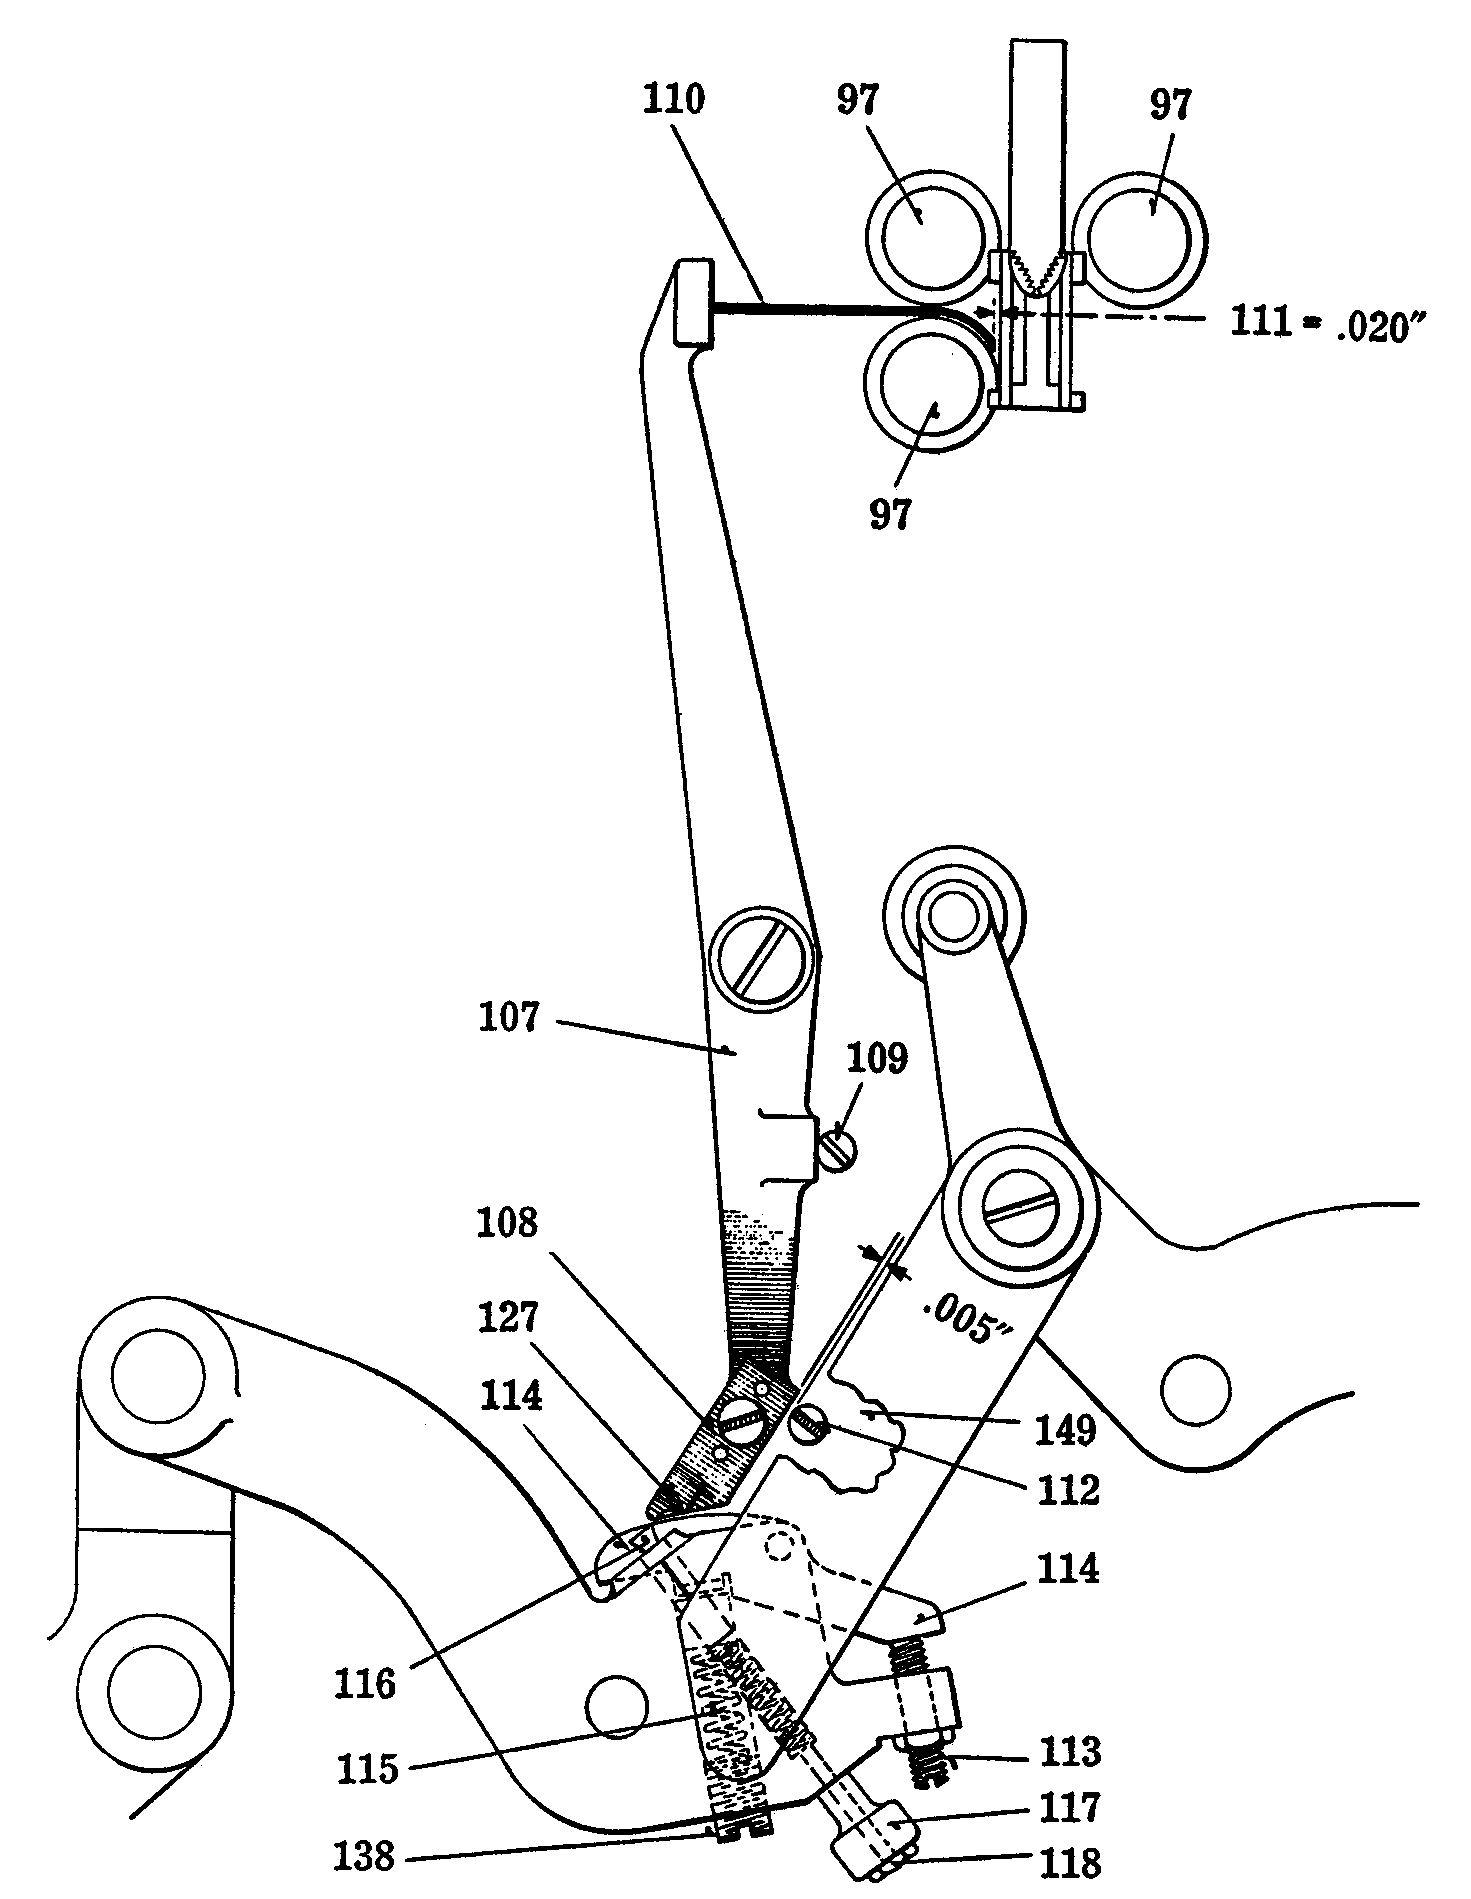 Line drawing of matrix guard safety mechanism